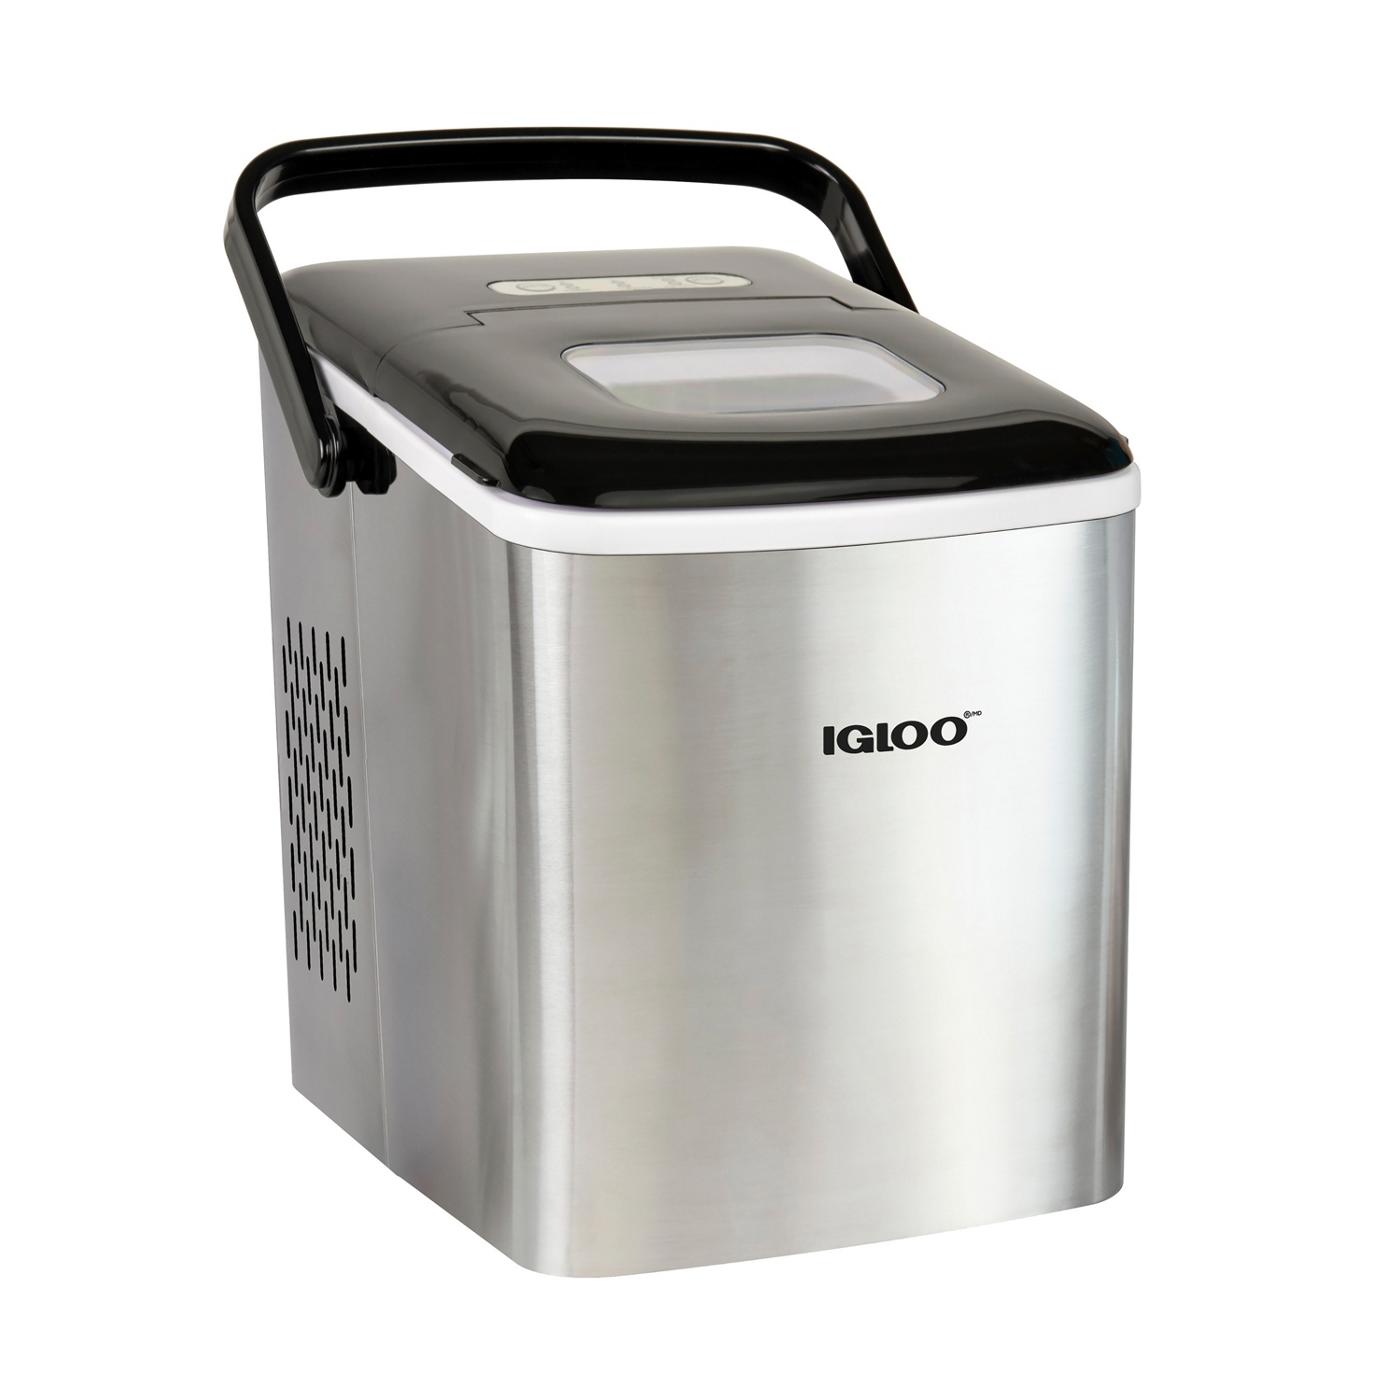 Igloo Self Cleaning Ice Maker with Carrying Handle; image 1 of 6